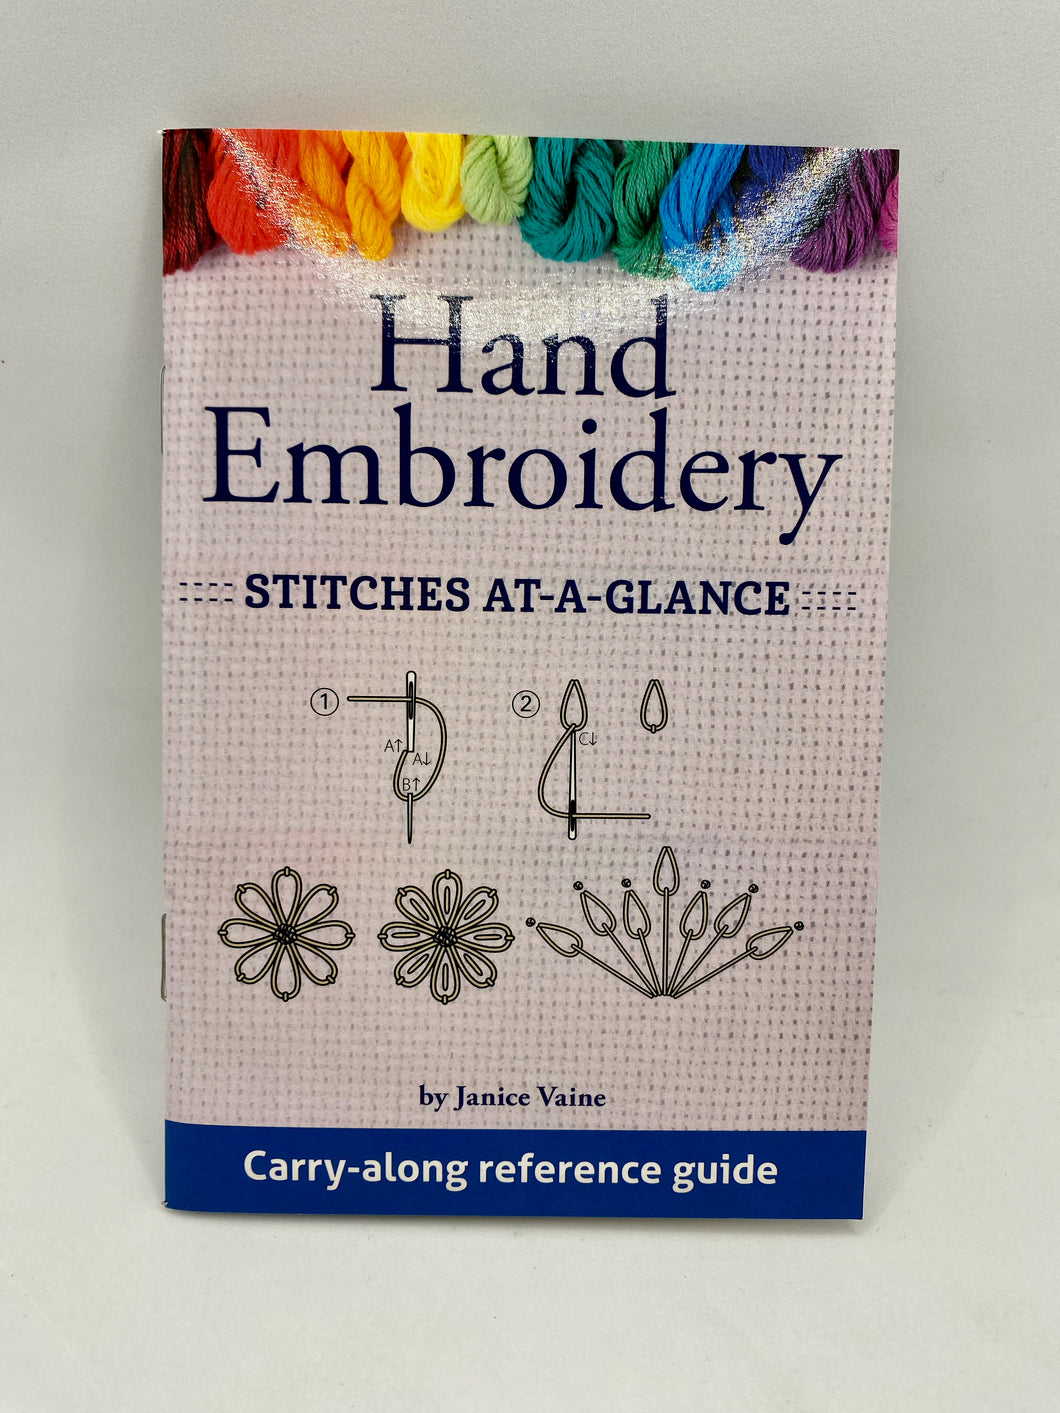 Hand Embroidery: Stitches At-A-Glance by Janice Caine